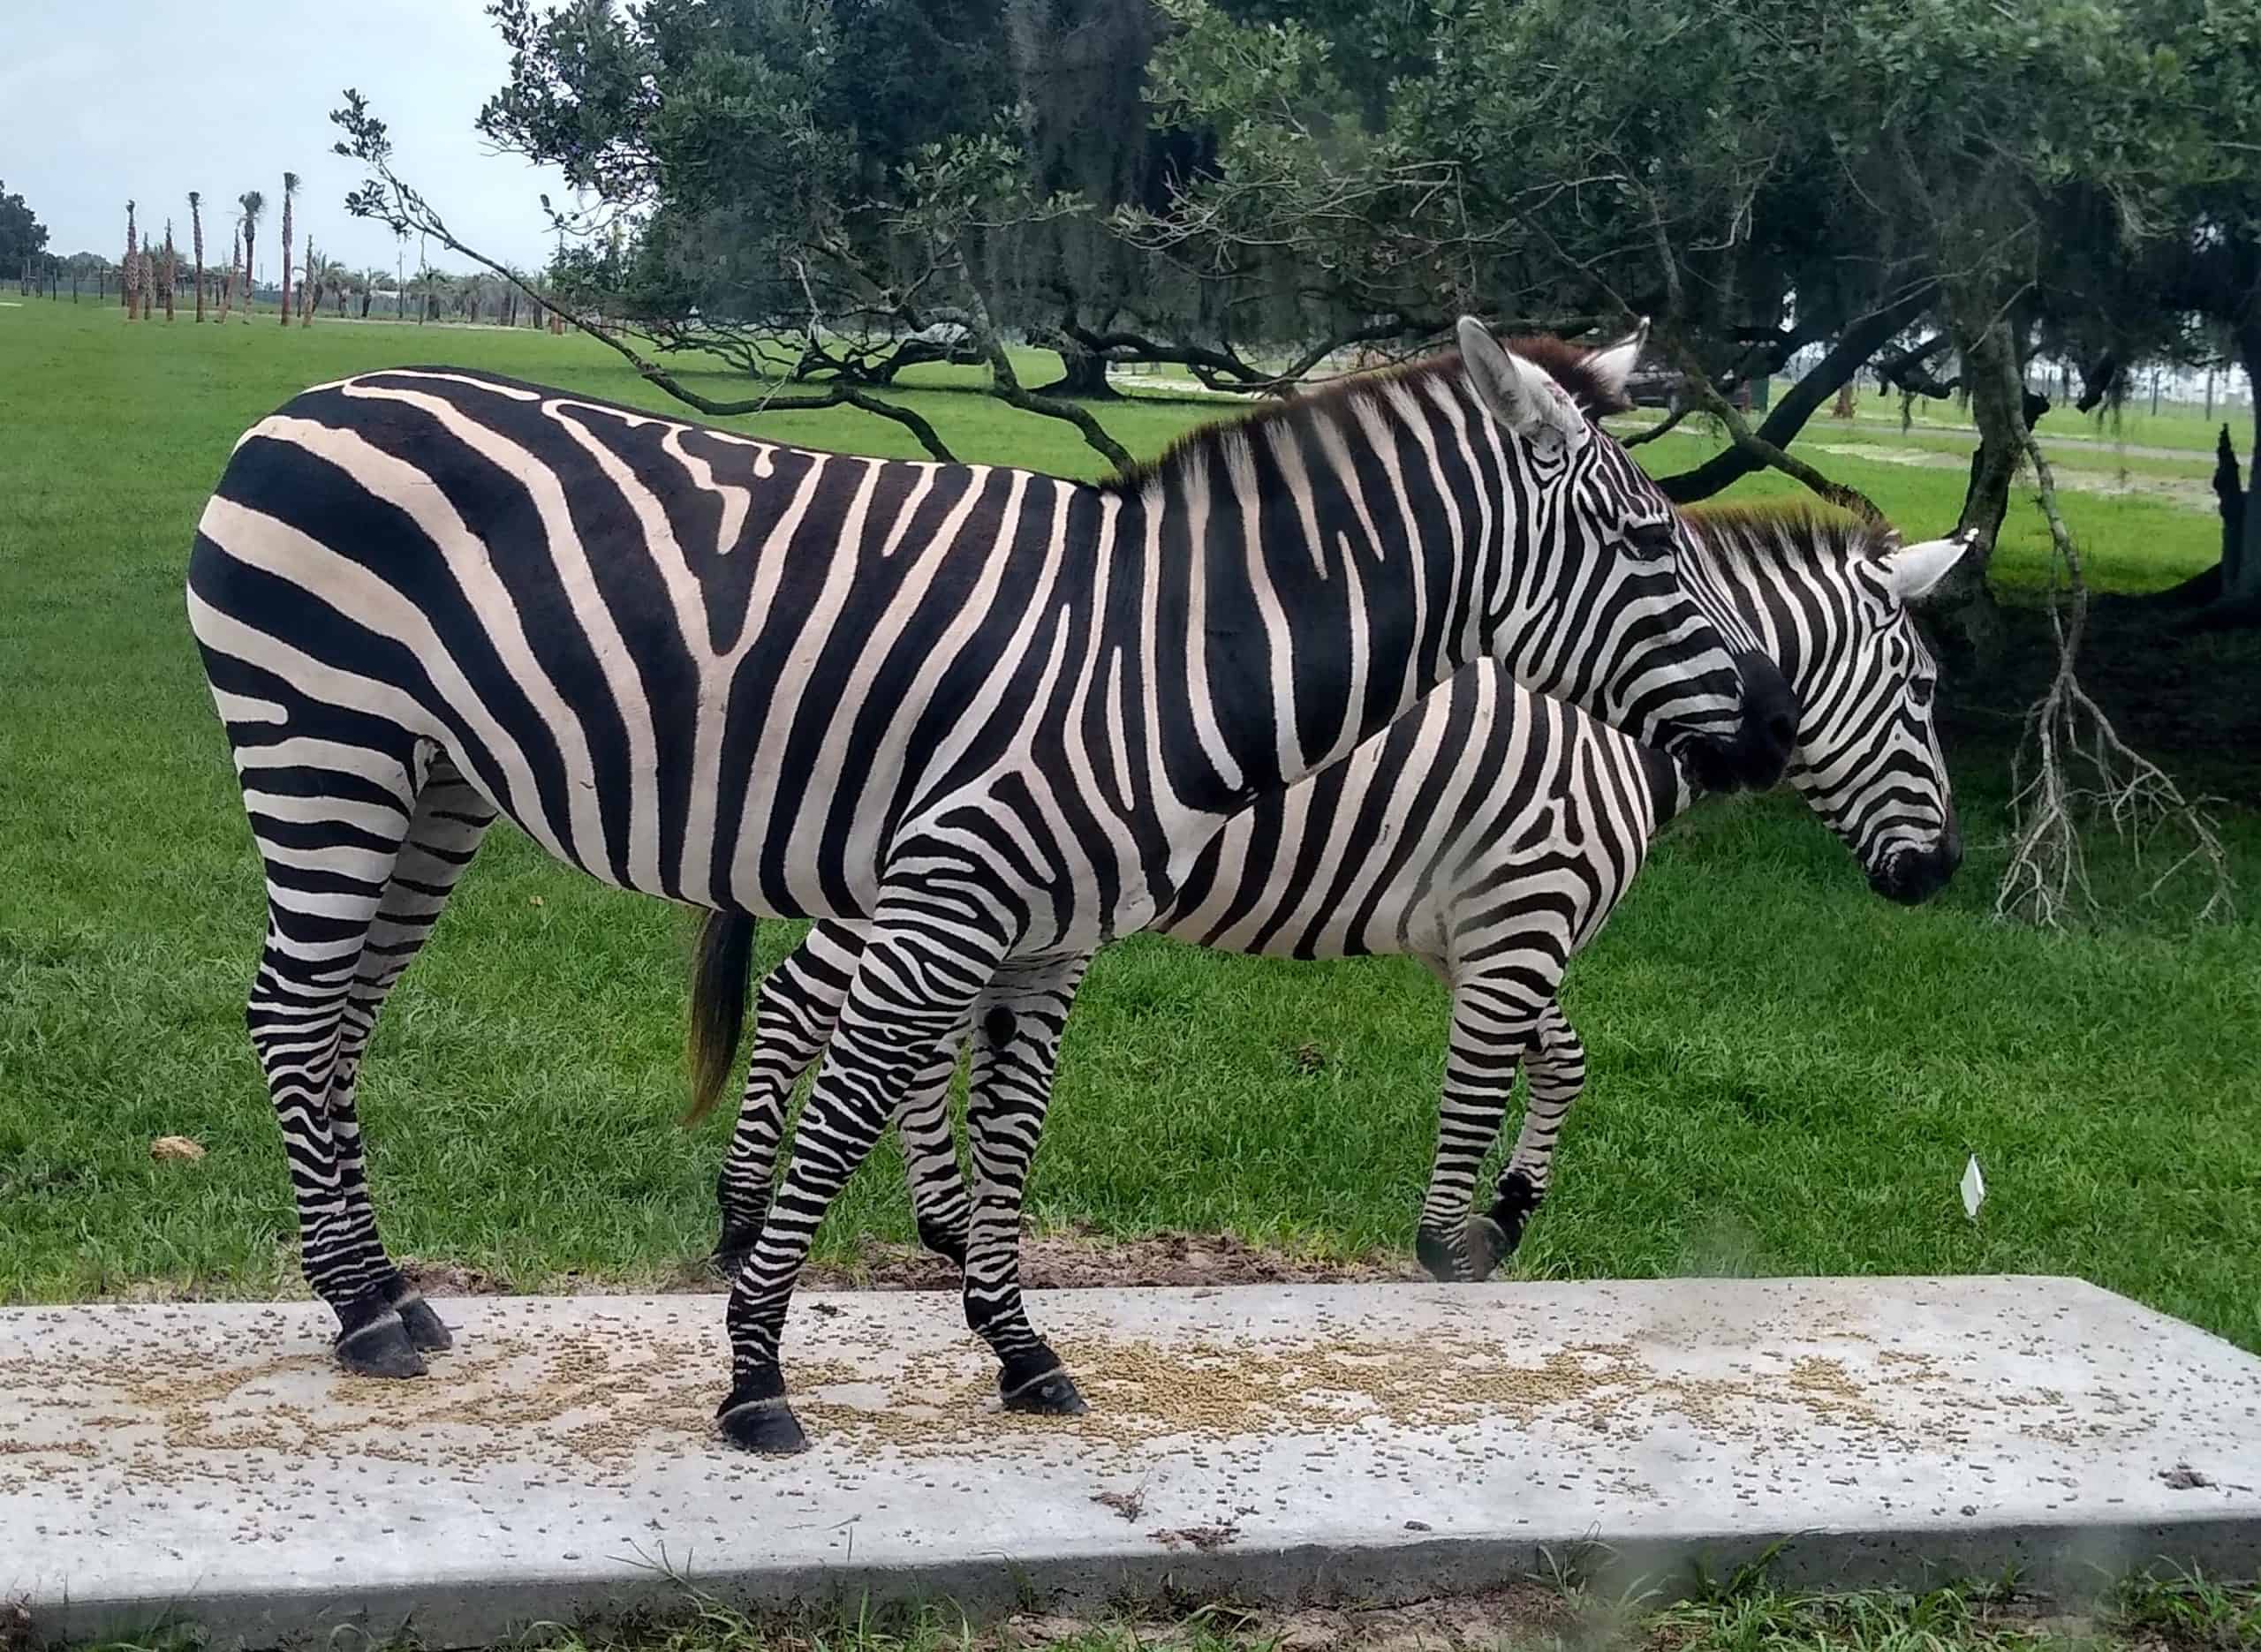 Visit Wild Florida Safari to see zebras from the comfort of your car.